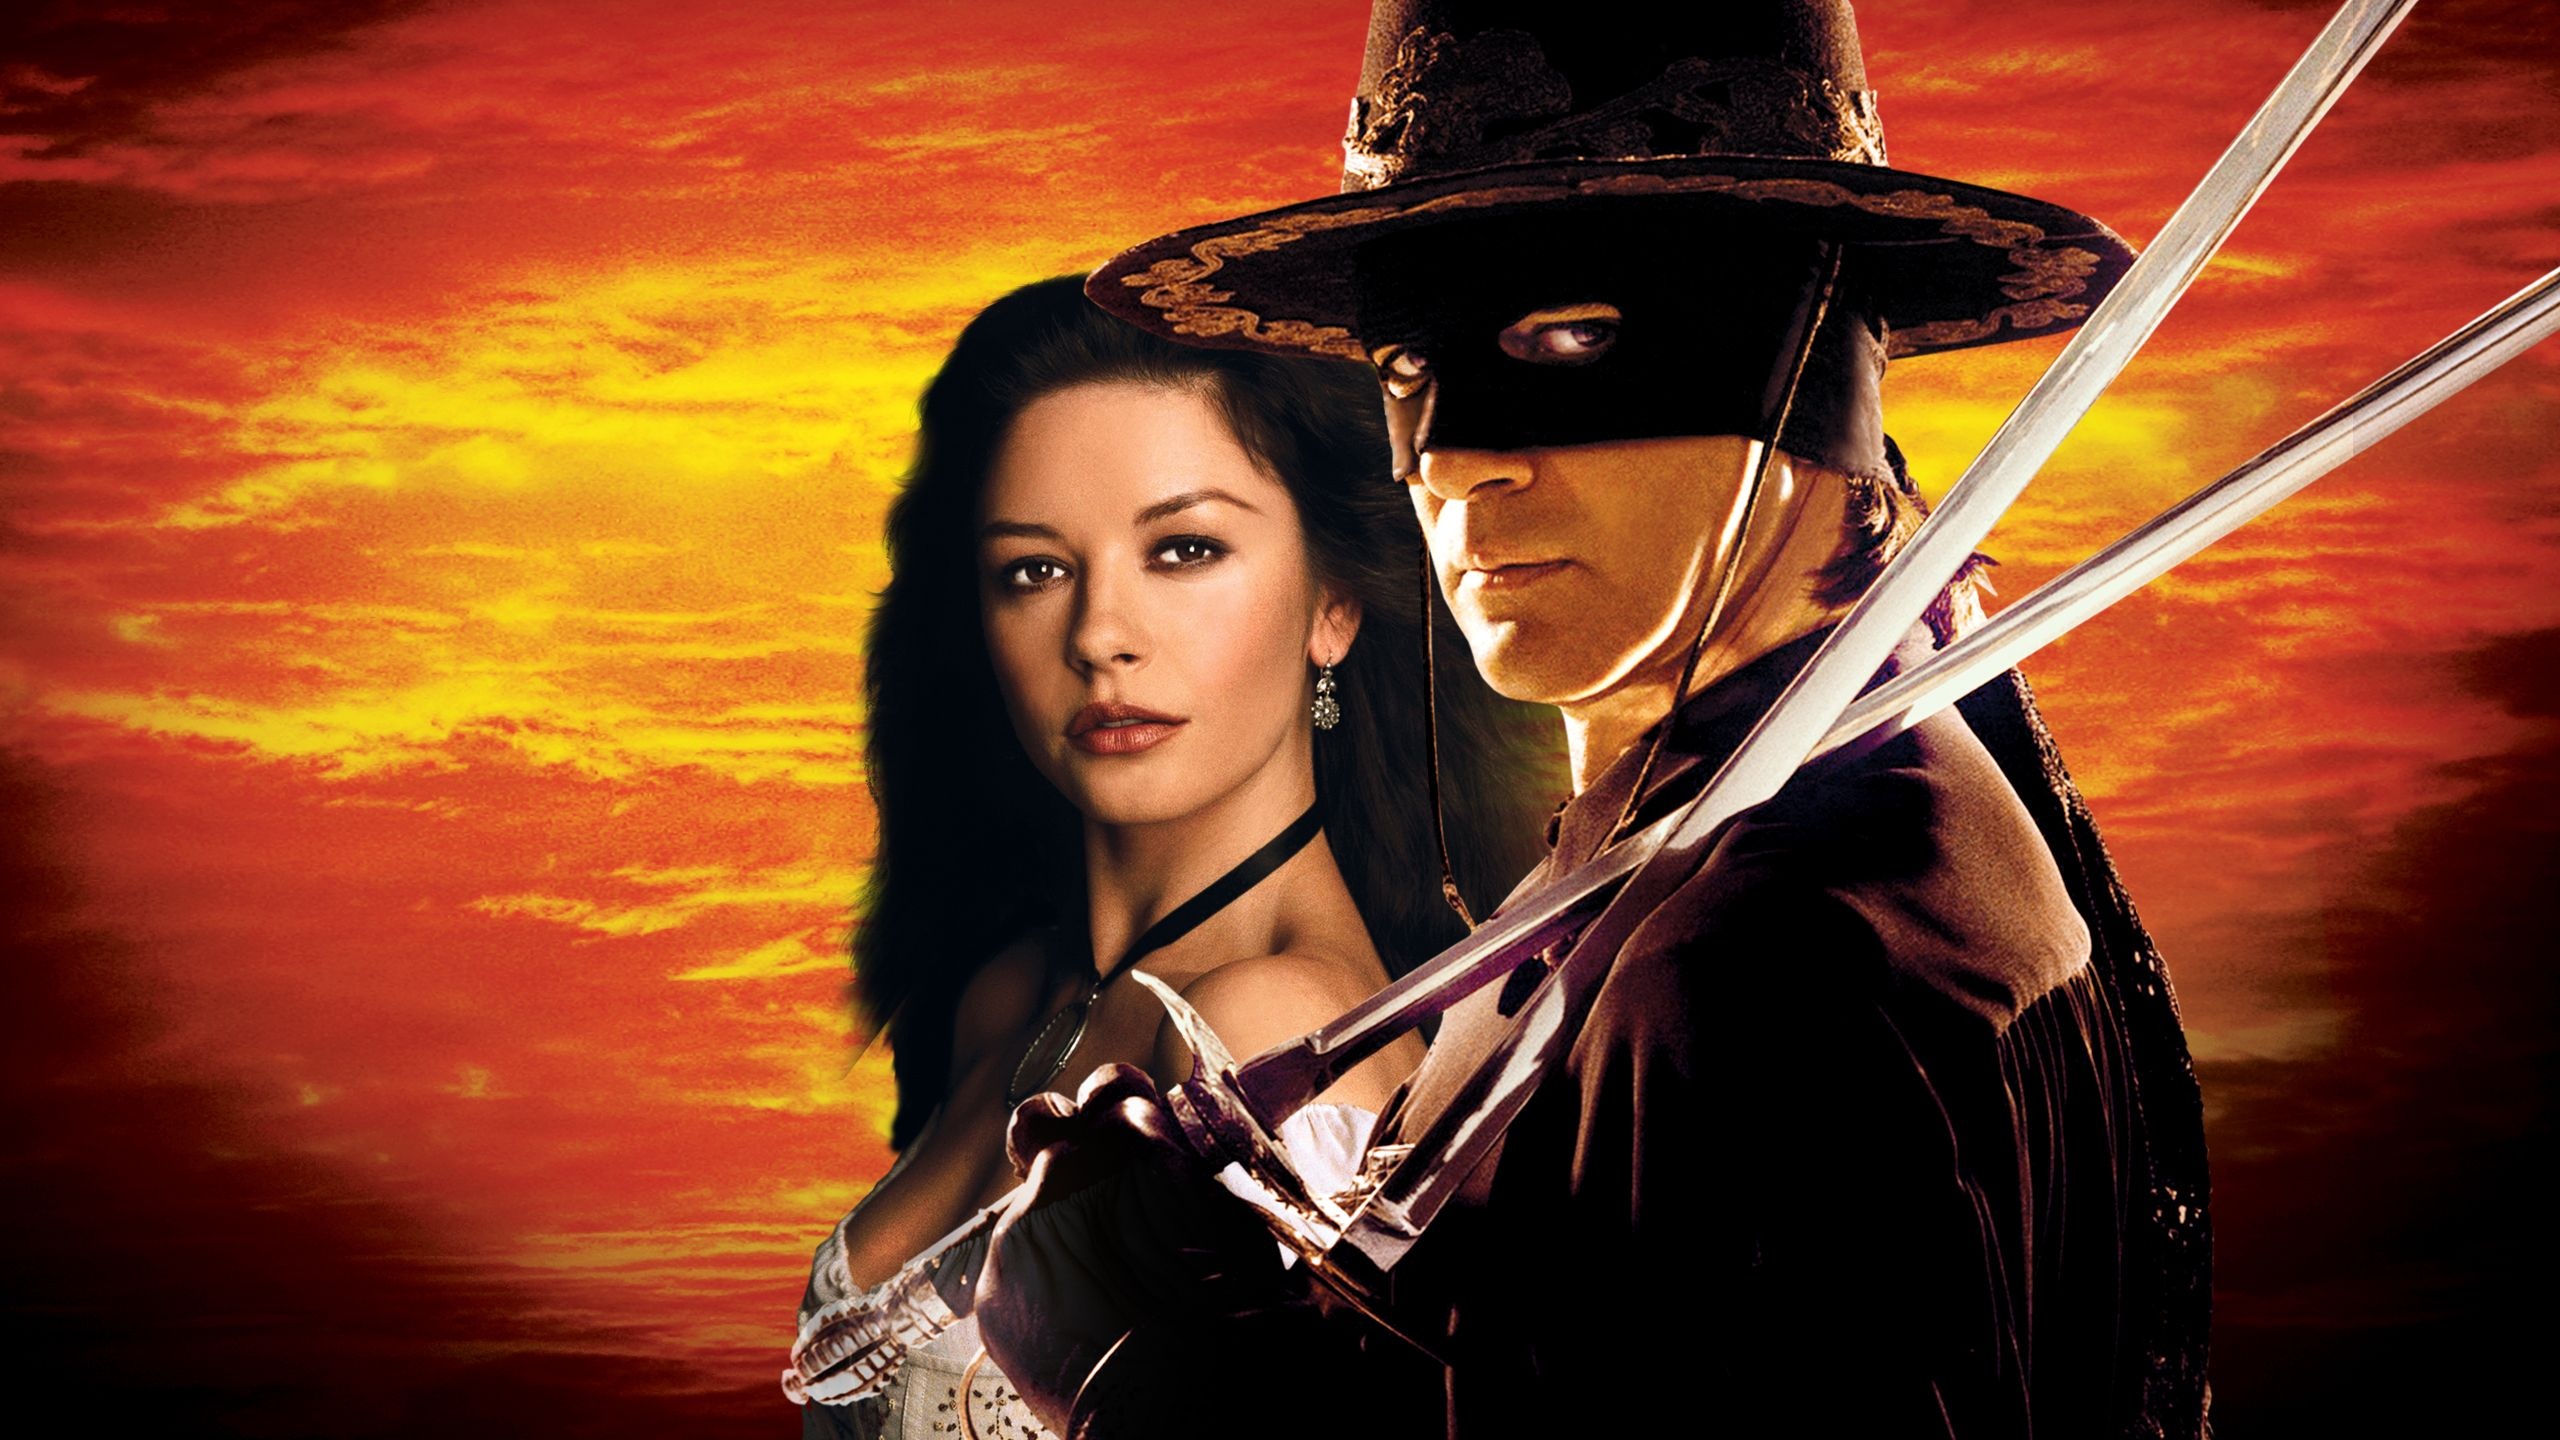 The Legend of Zorro: Produced by Walter F. Parkes, Laurie MacDonald and Lloyd Phillips. 2560x1440 HD Wallpaper.